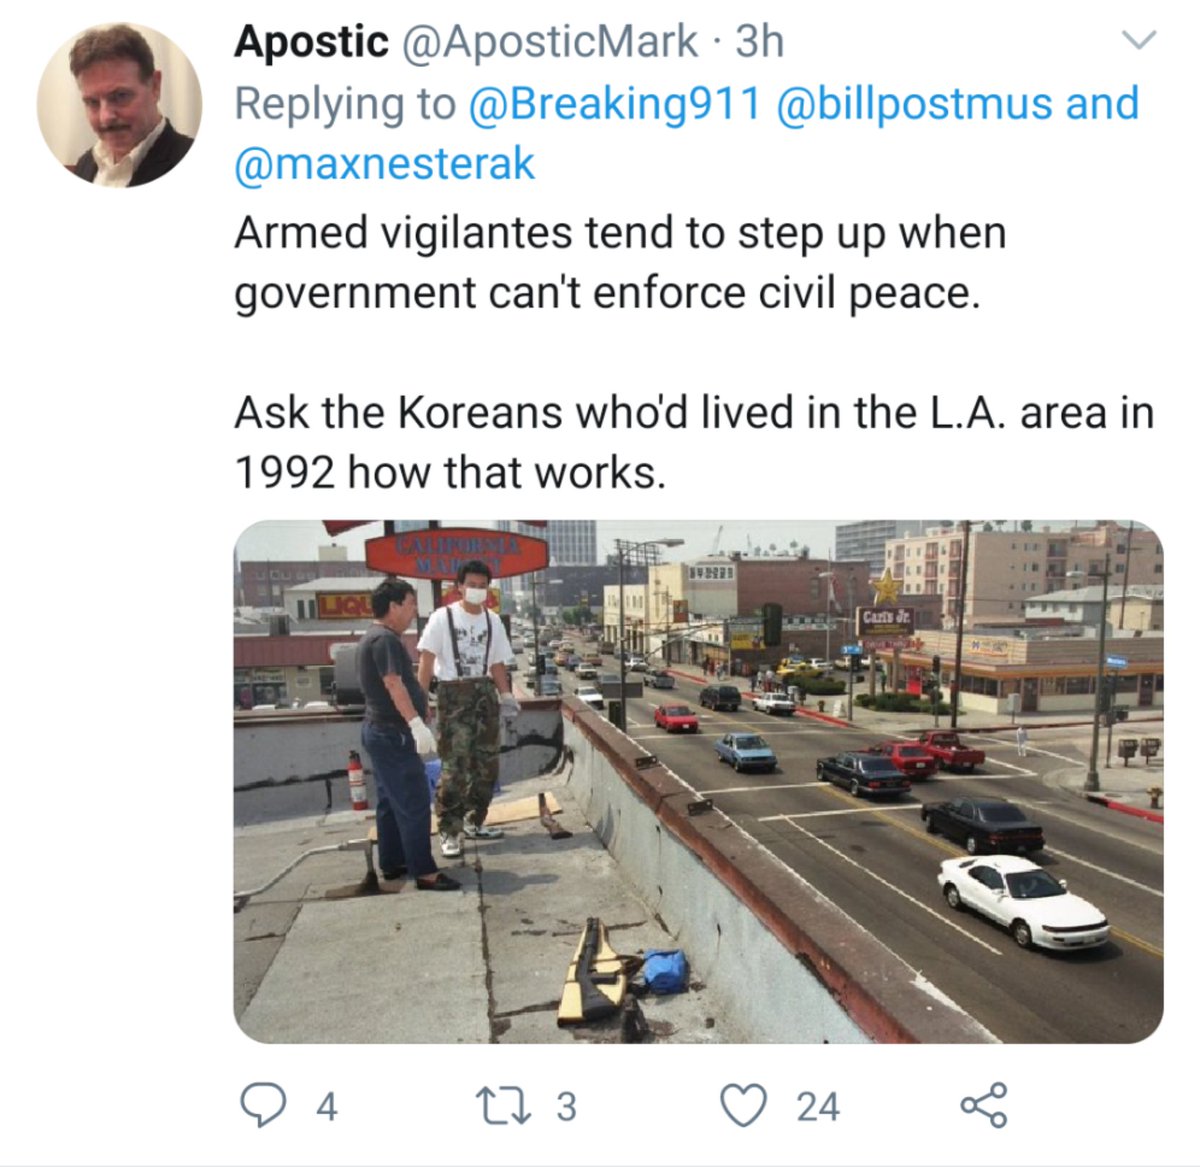 Look a "libertarian", a "veteran", and a supposed Christian just dropping 'Rooftop Koreans' in there to justify these armed men ready to shoot protesters. And they're all too eager to ignore the racial injustice that sparked the LA riots too. But sure, use Koreans as a shield.